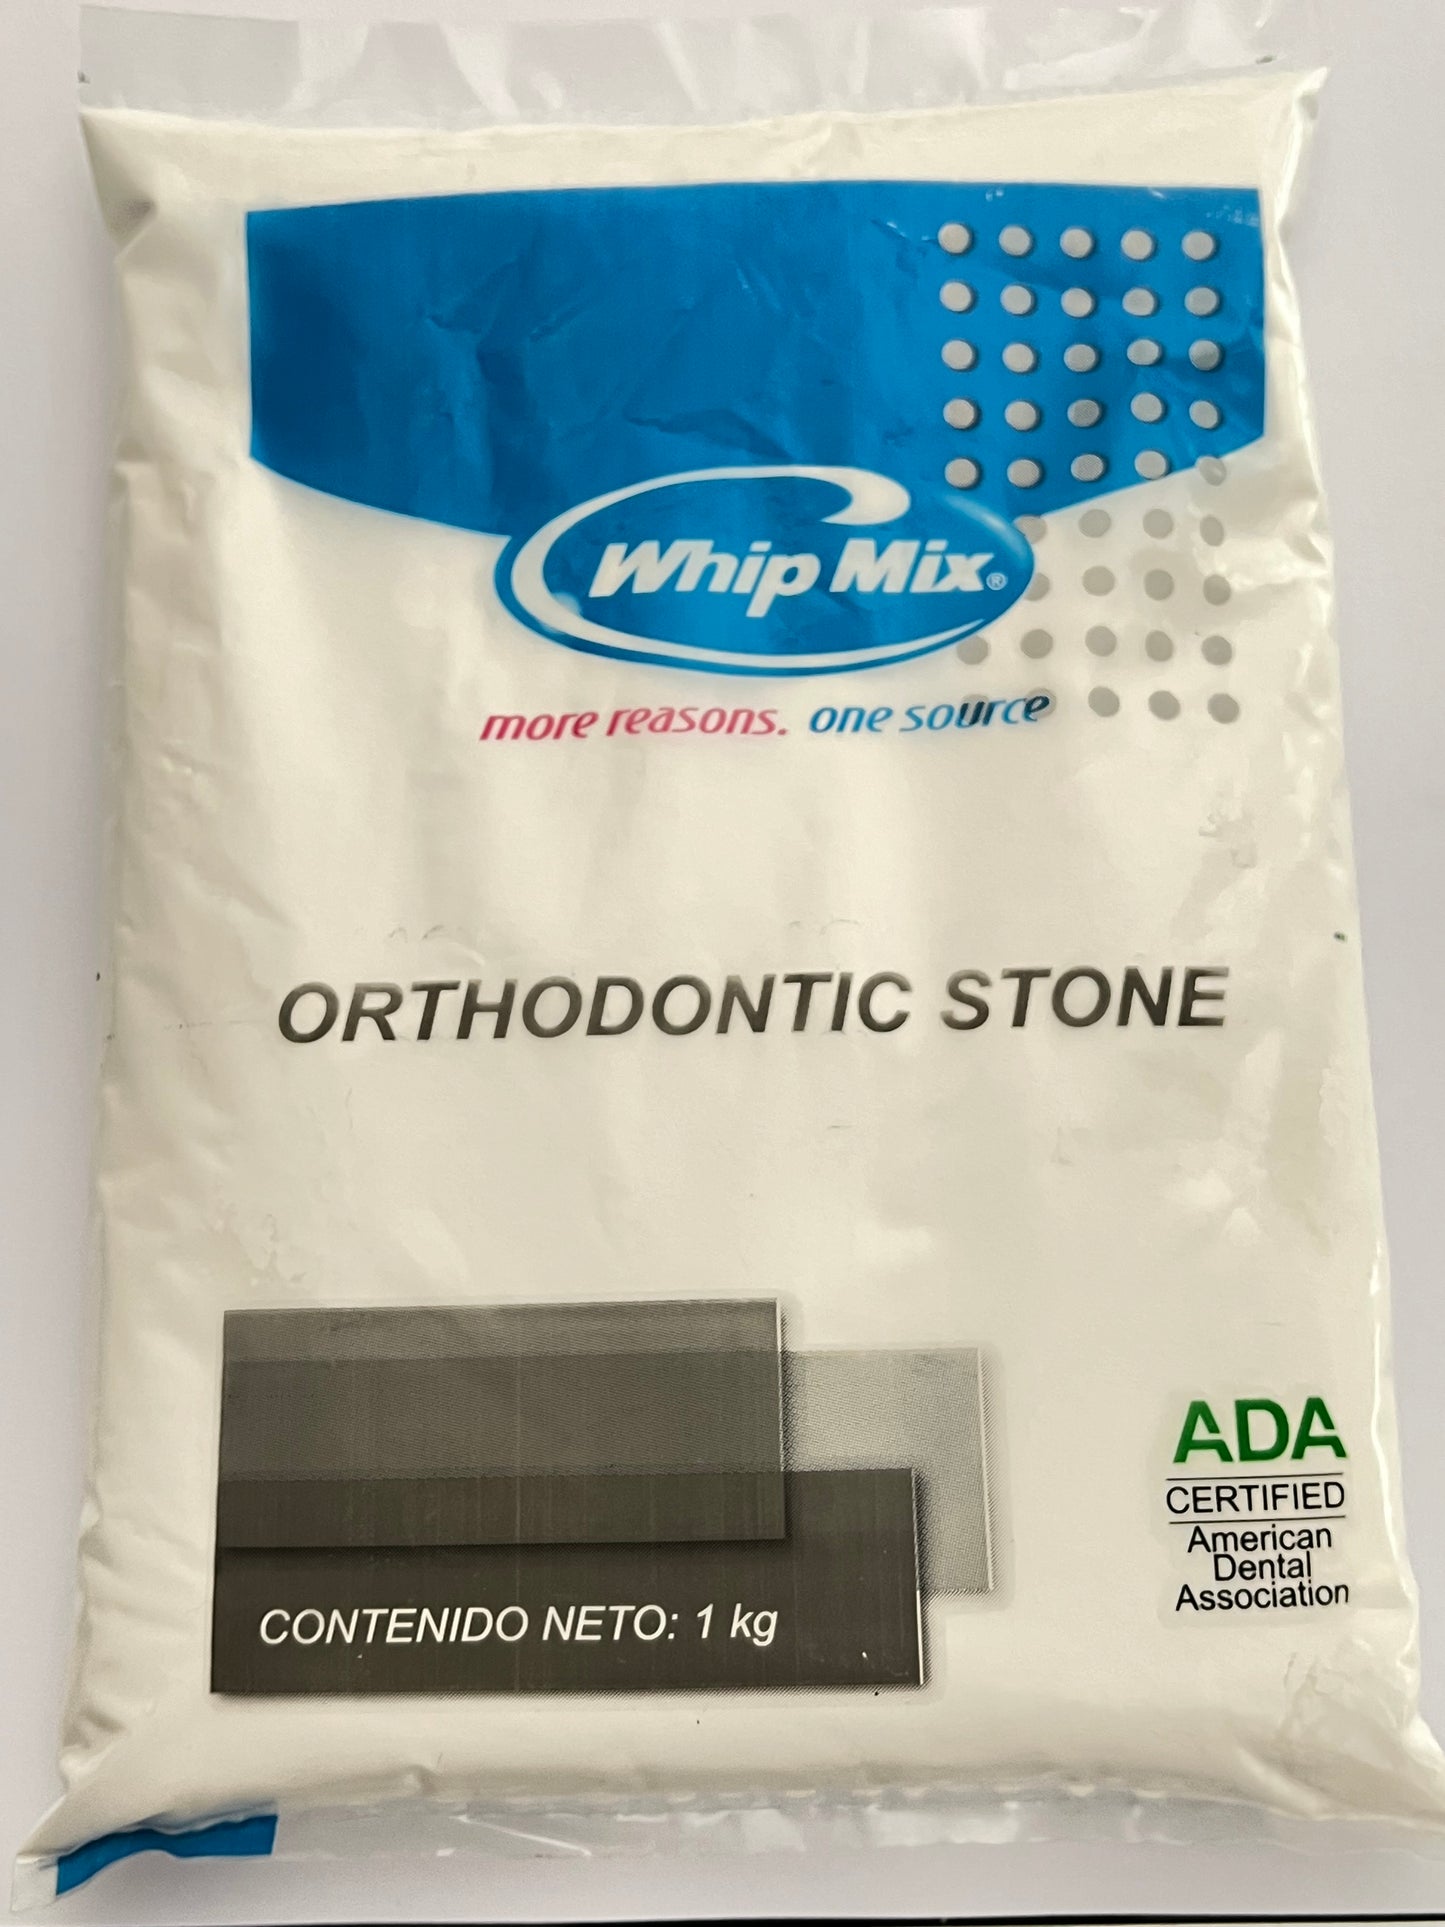 Yeso ortodoncia 1kg whip-mix